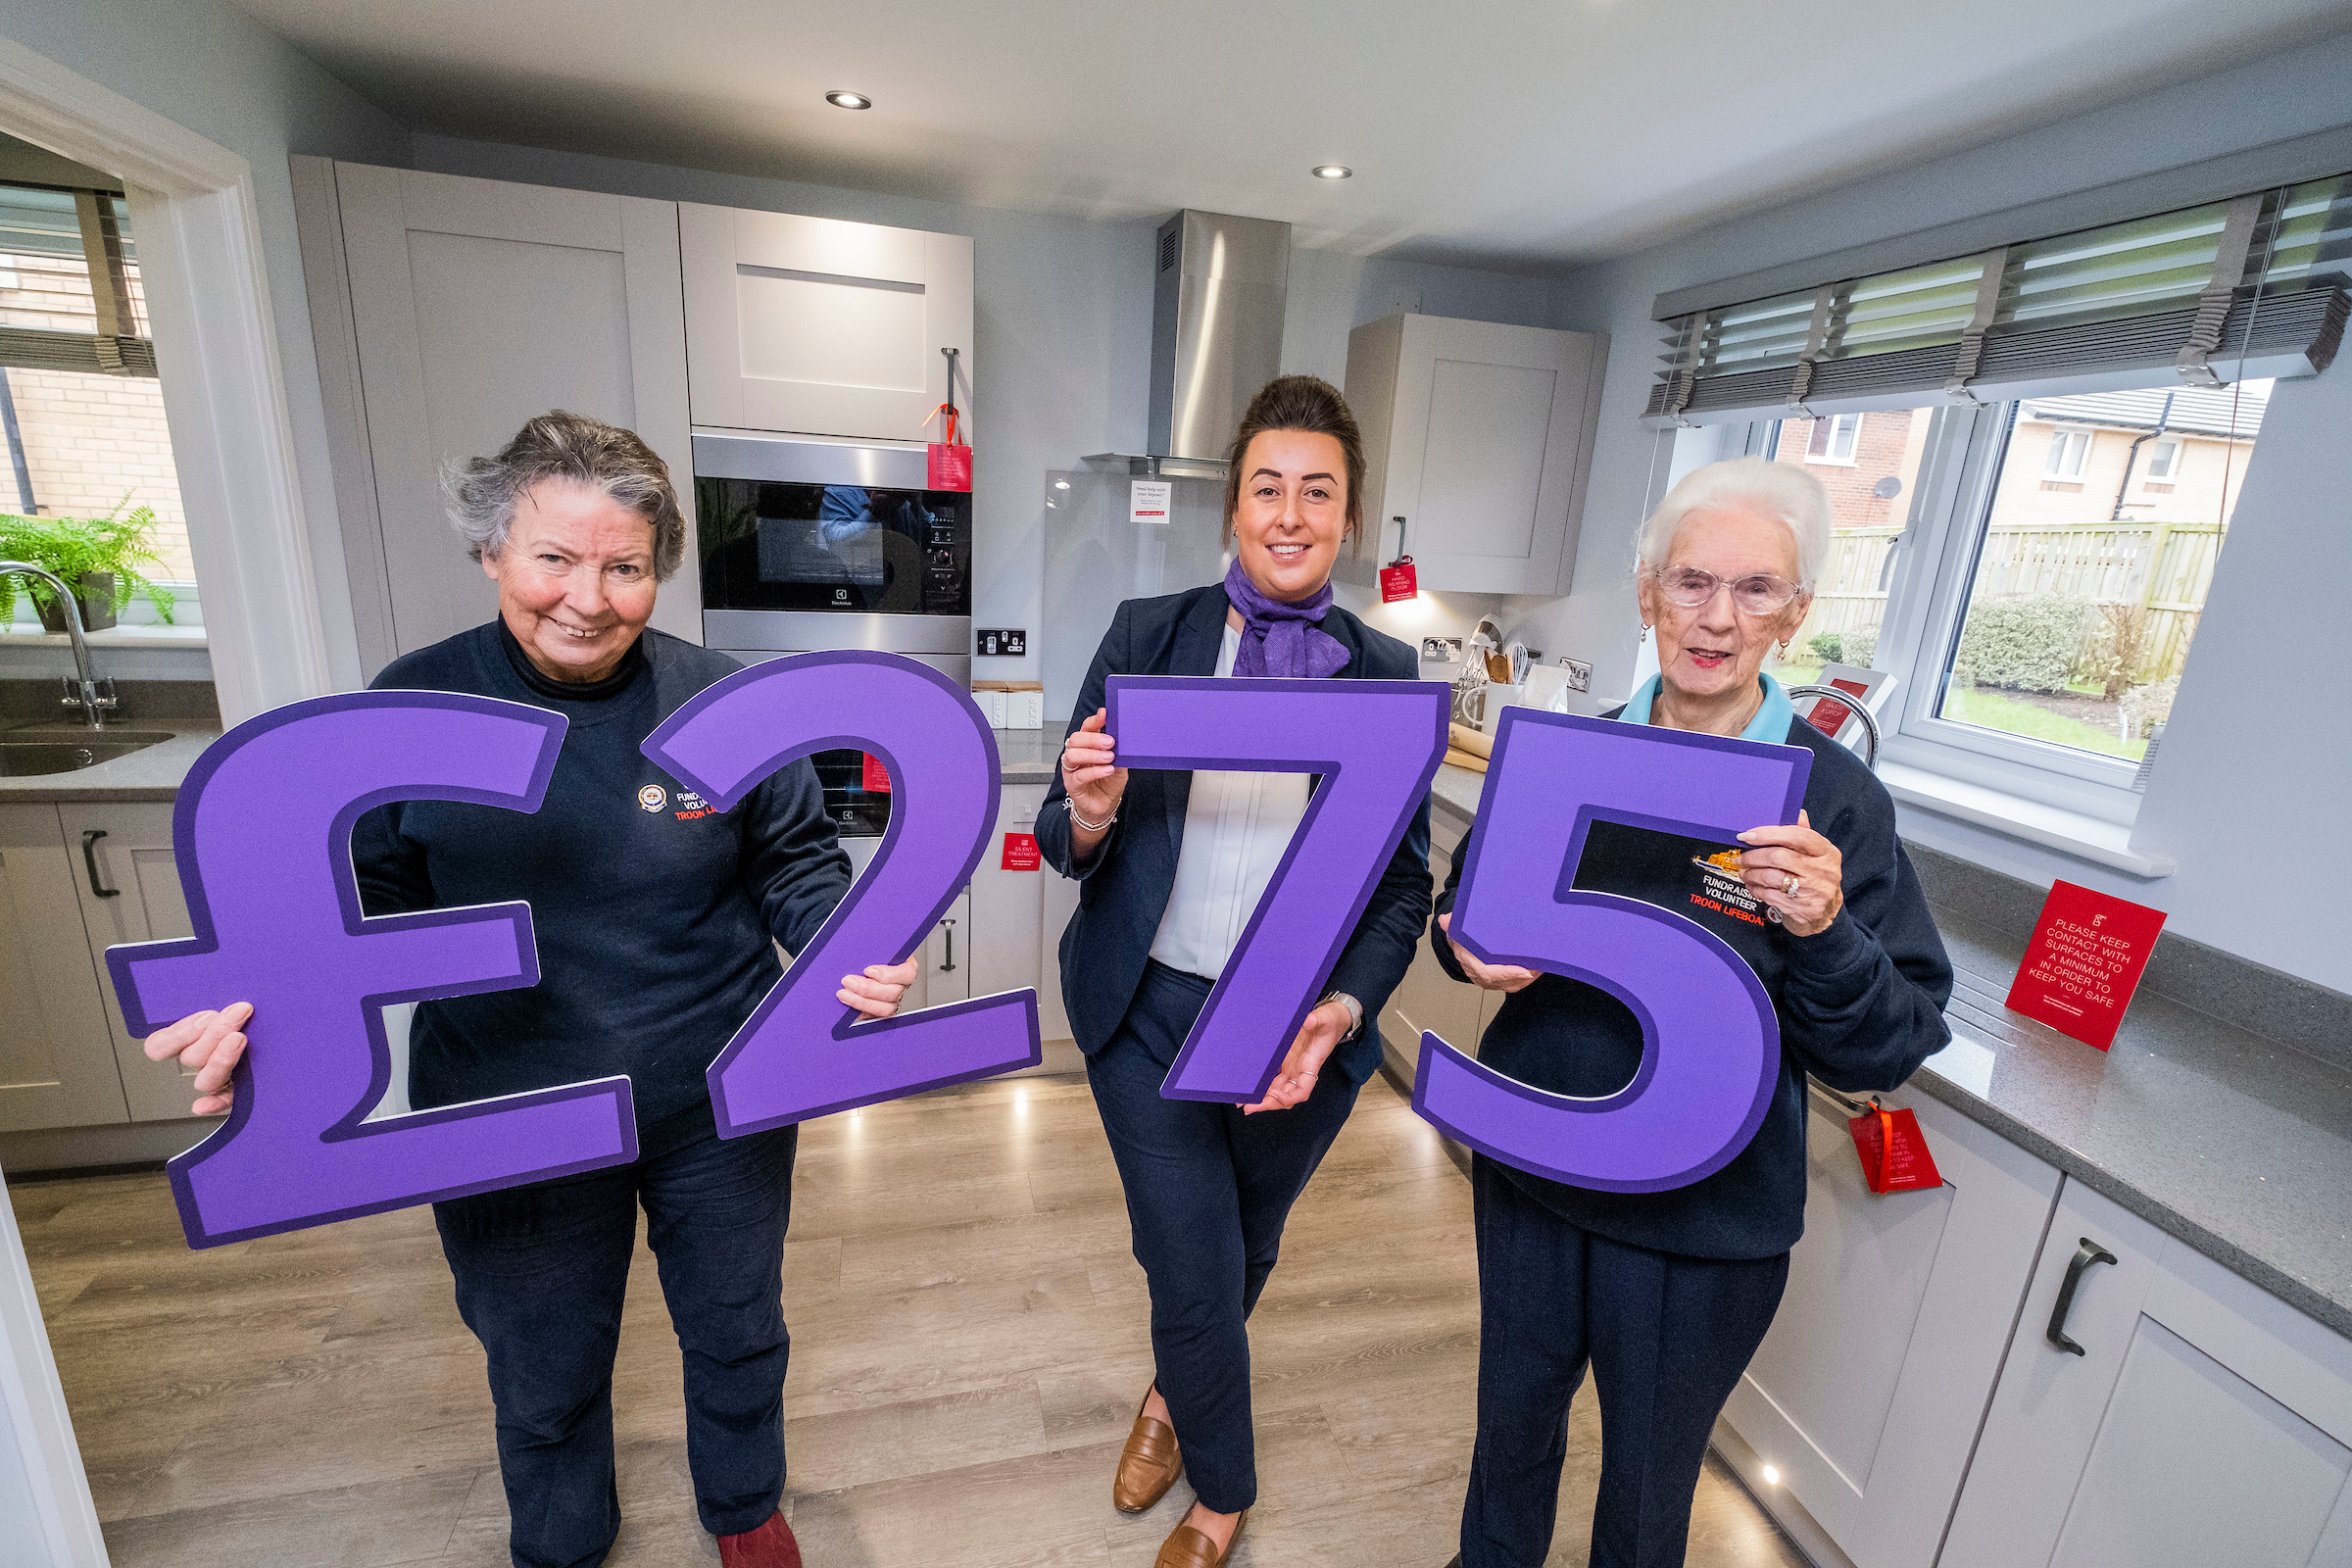 RNLI receives fourth donation from Taylor Wimpey